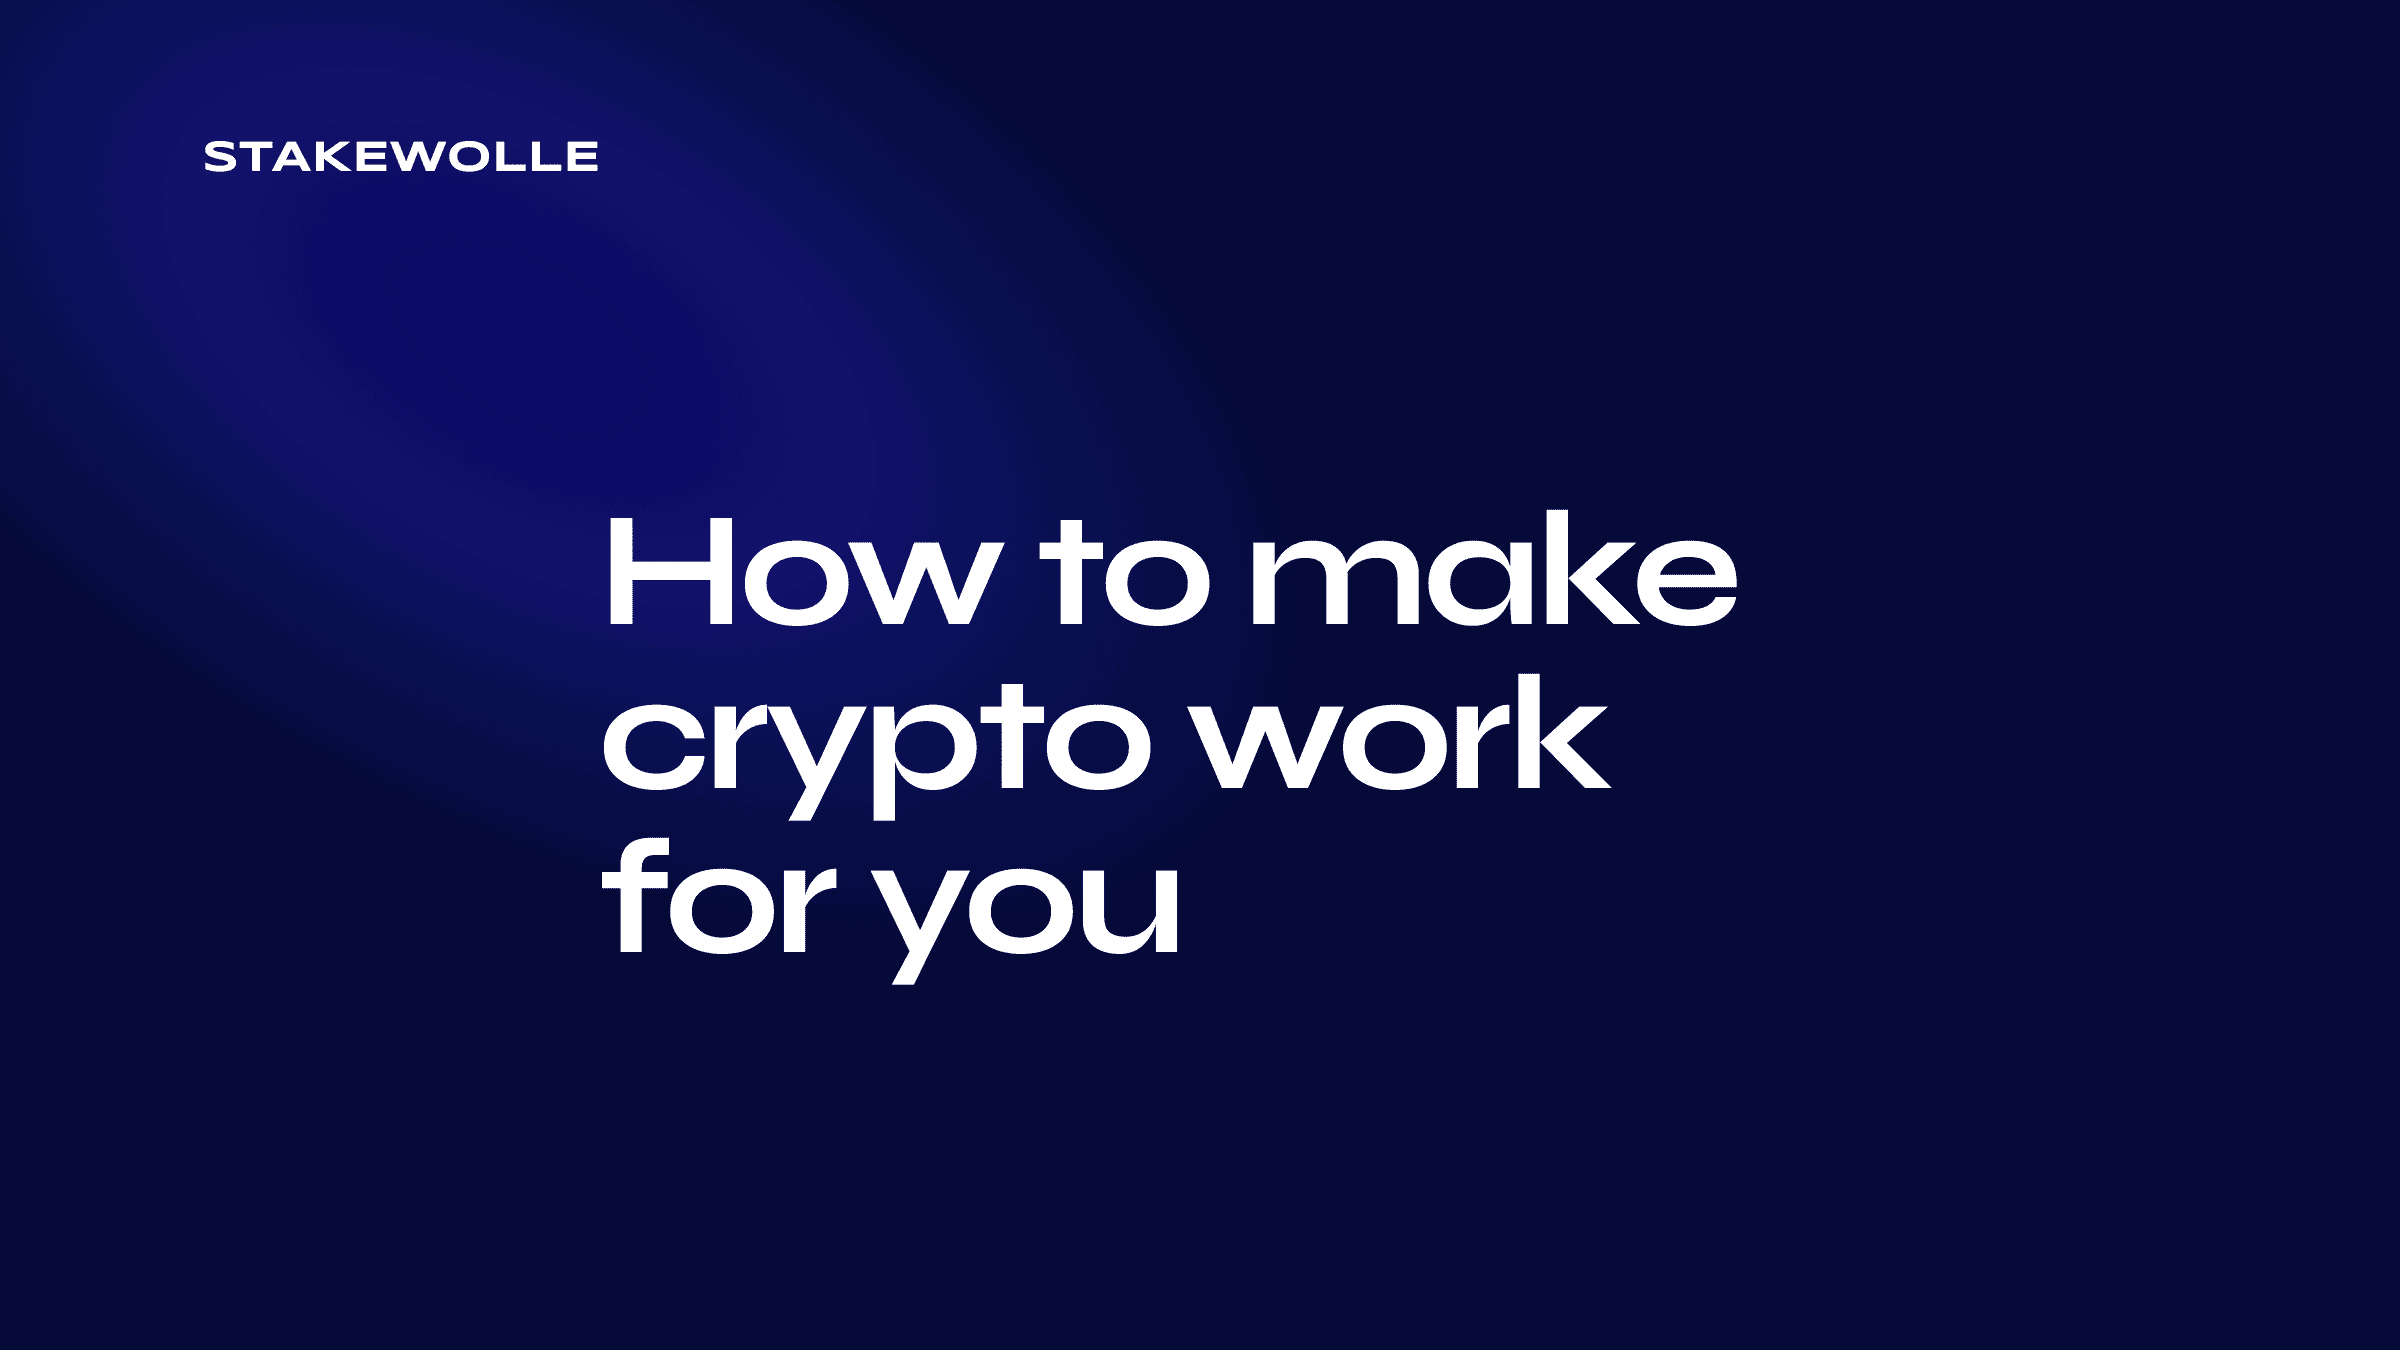 How to make crypto work for you